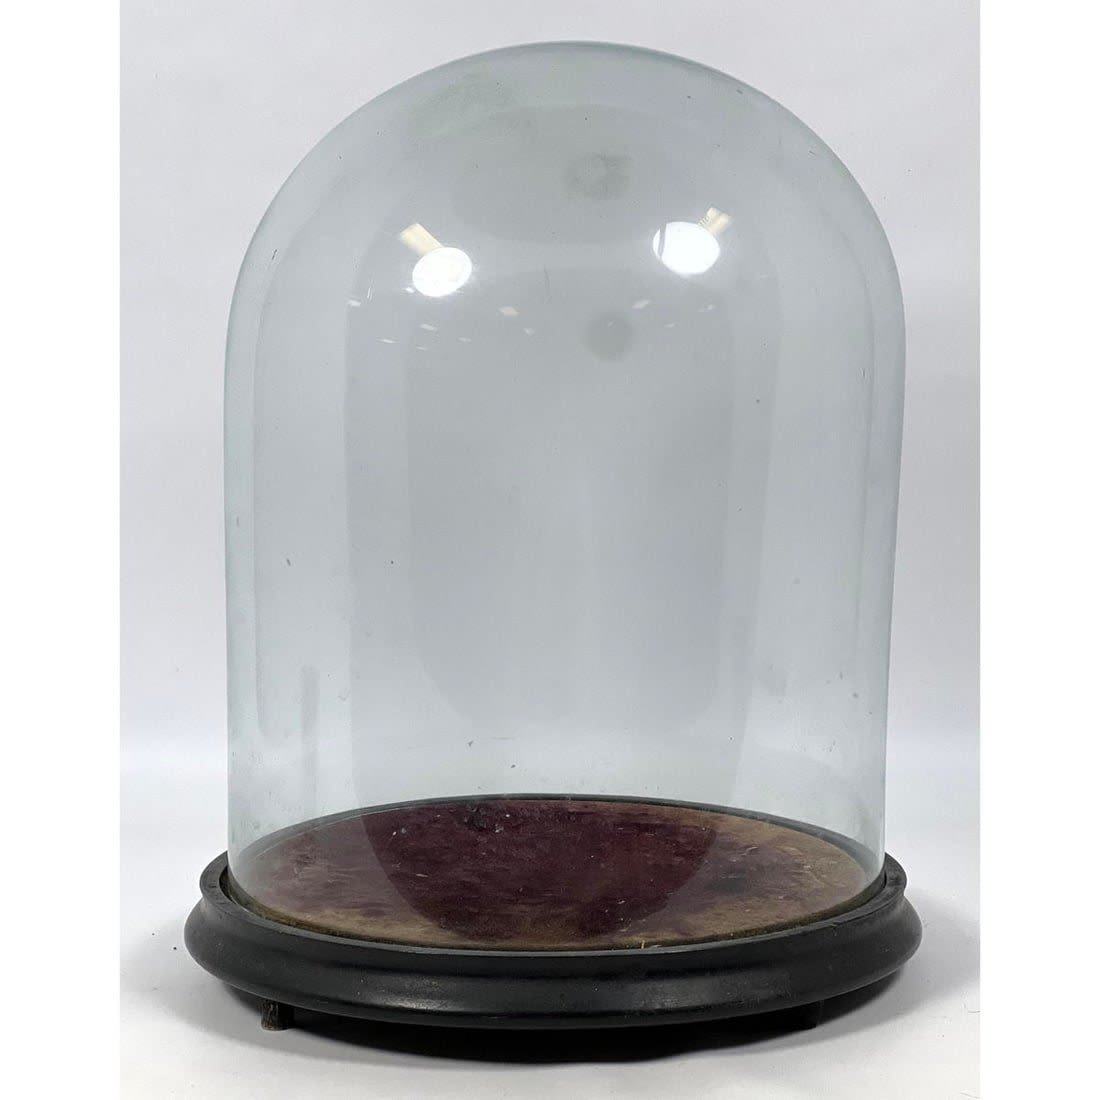 Victorian glass dome. Tall and